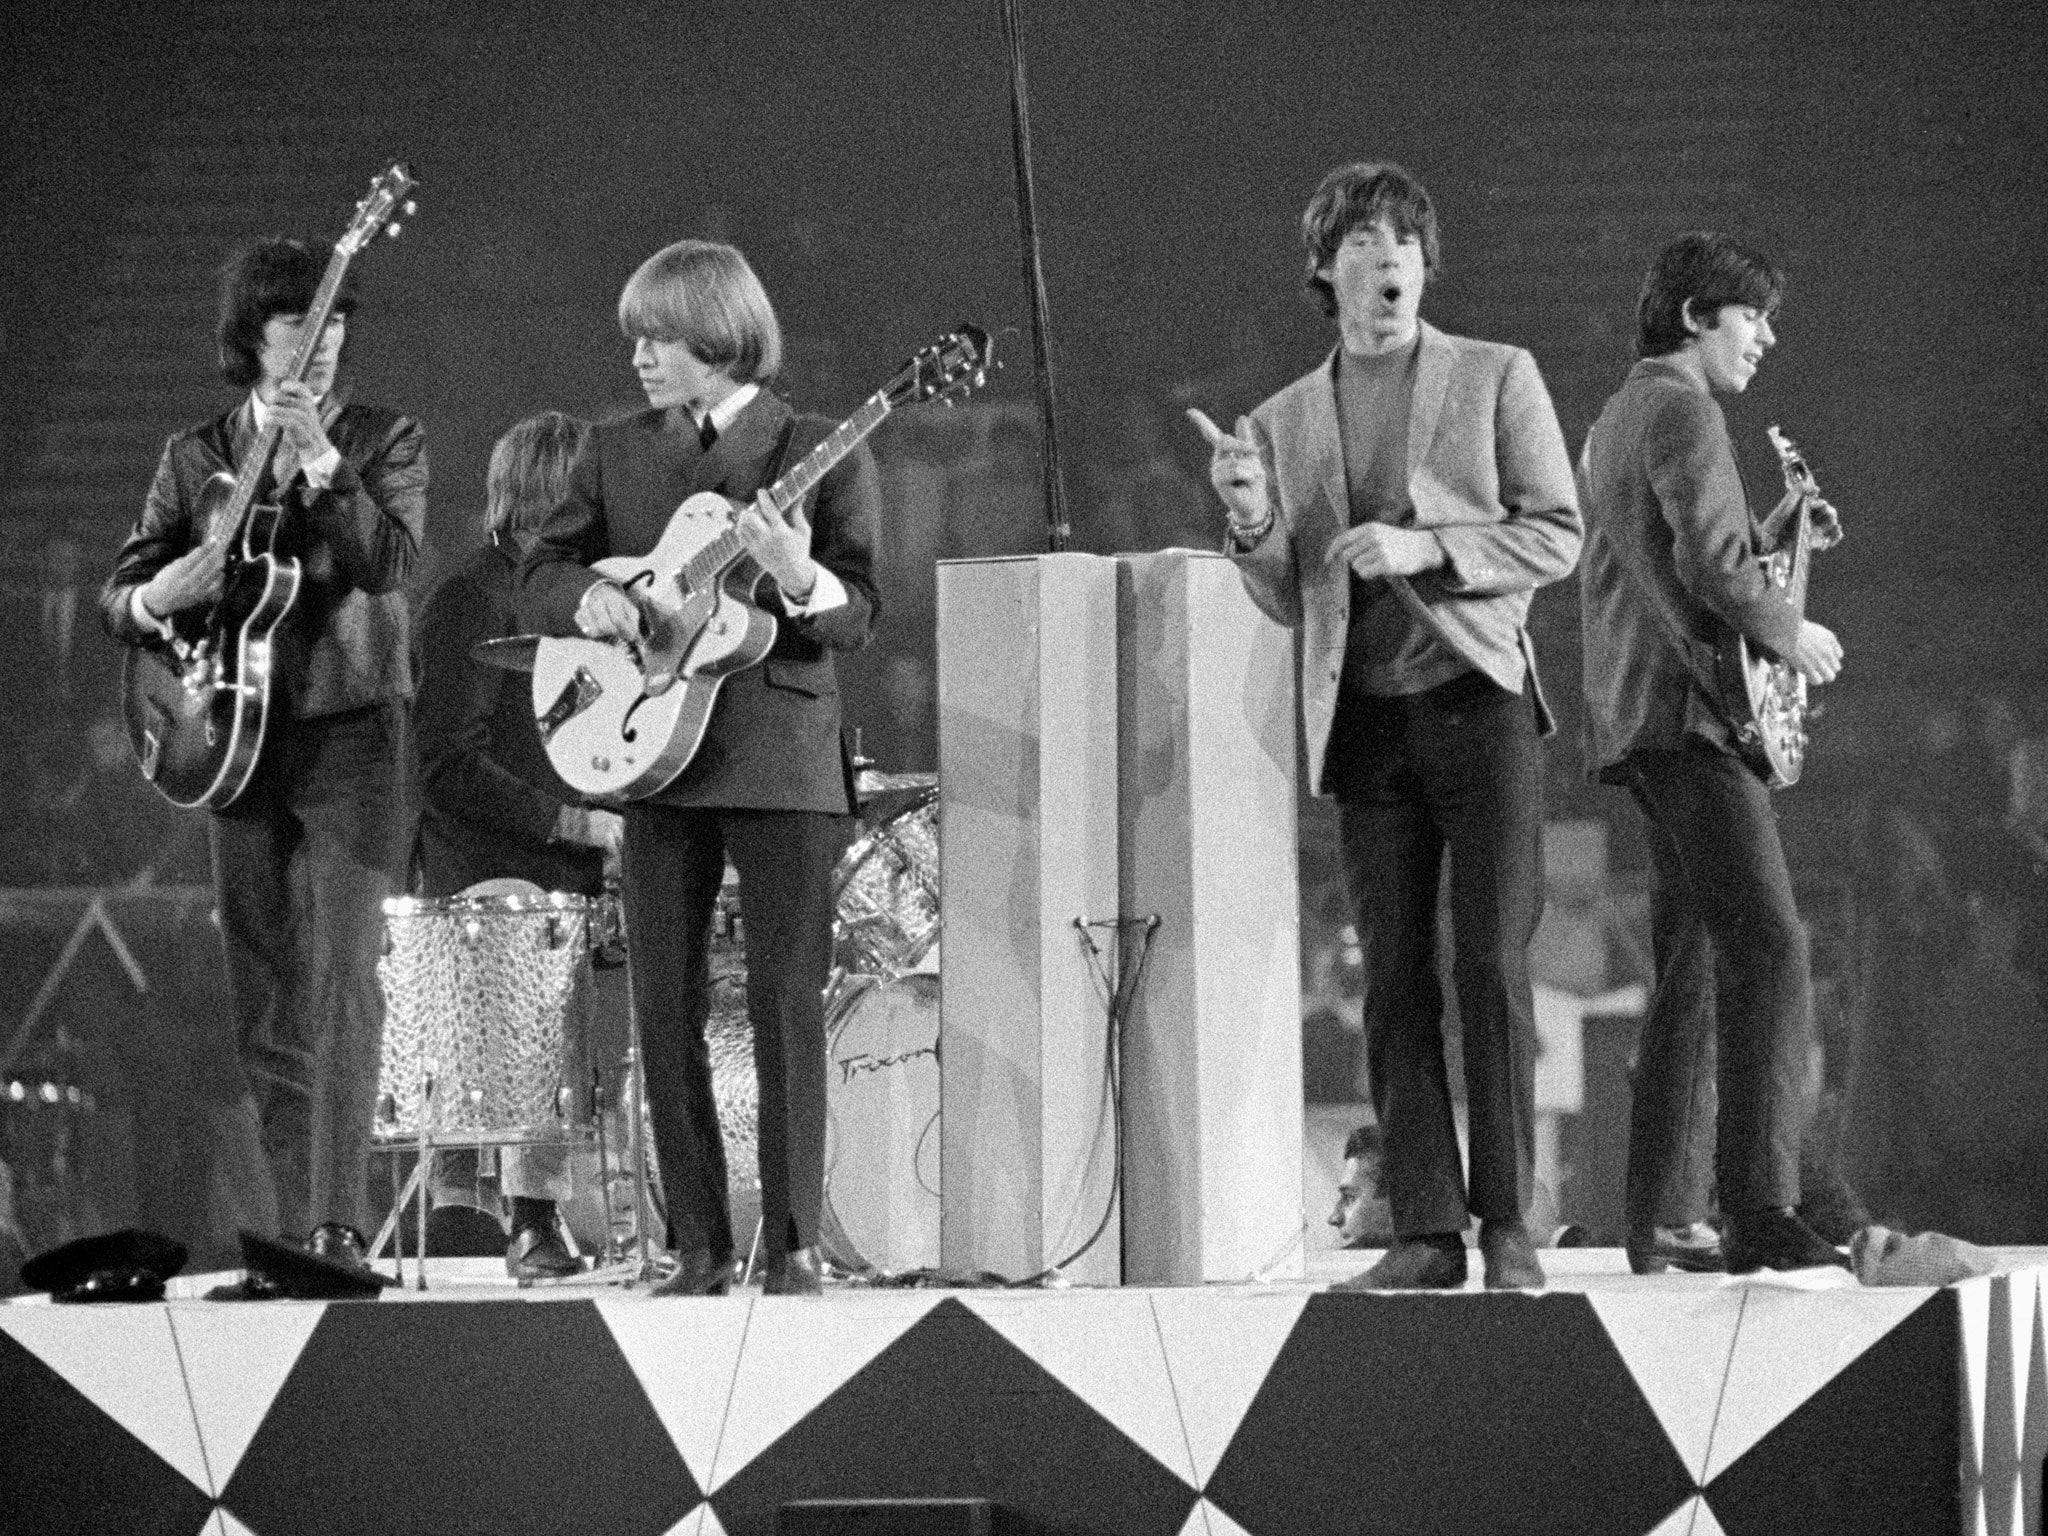 The Rolling Stones performing in concert in 1964